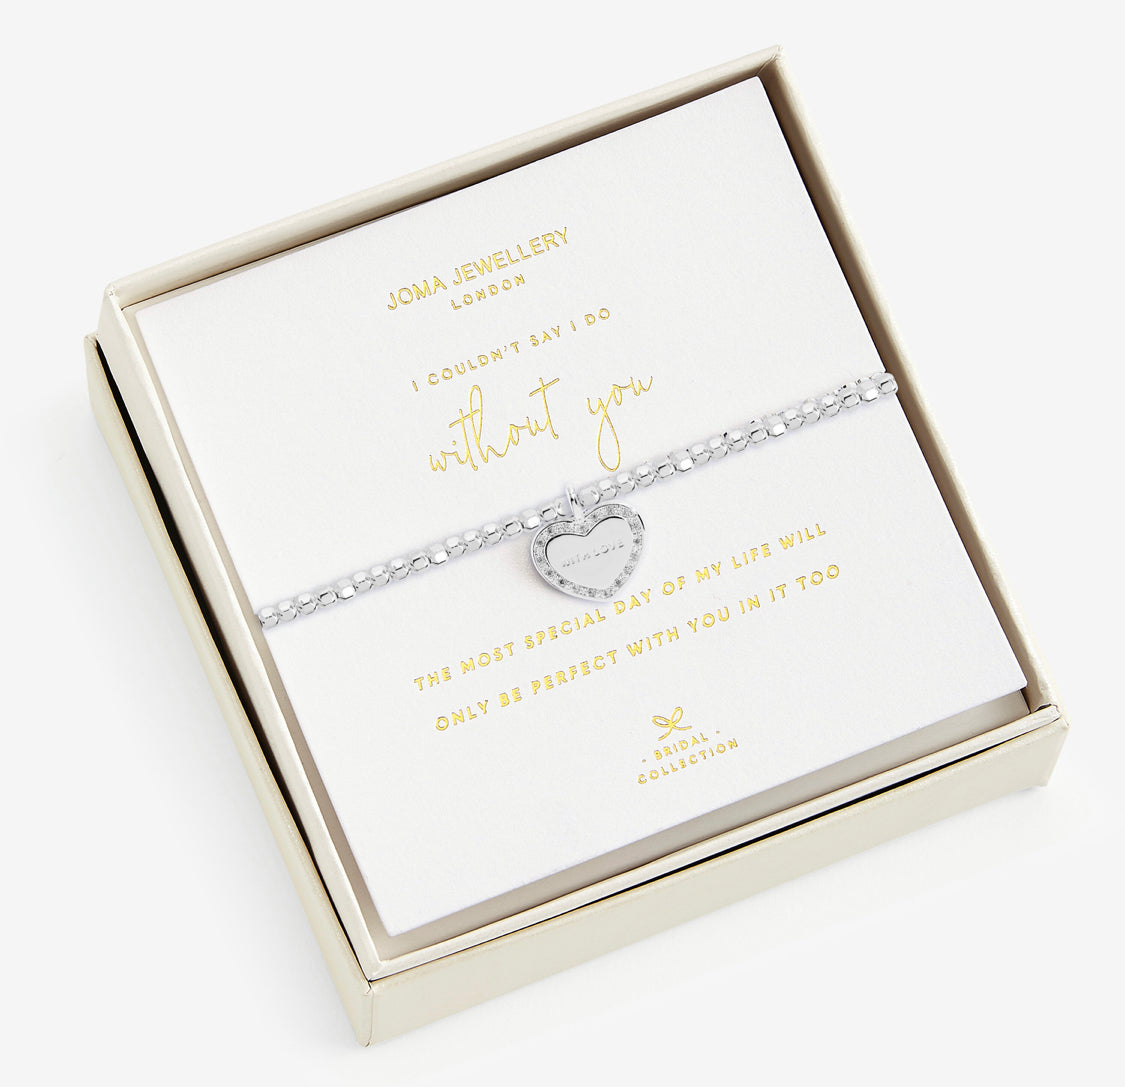 Joma jewellery- Boxed Bridal Collection- I Couldn’t Say I Do Without You